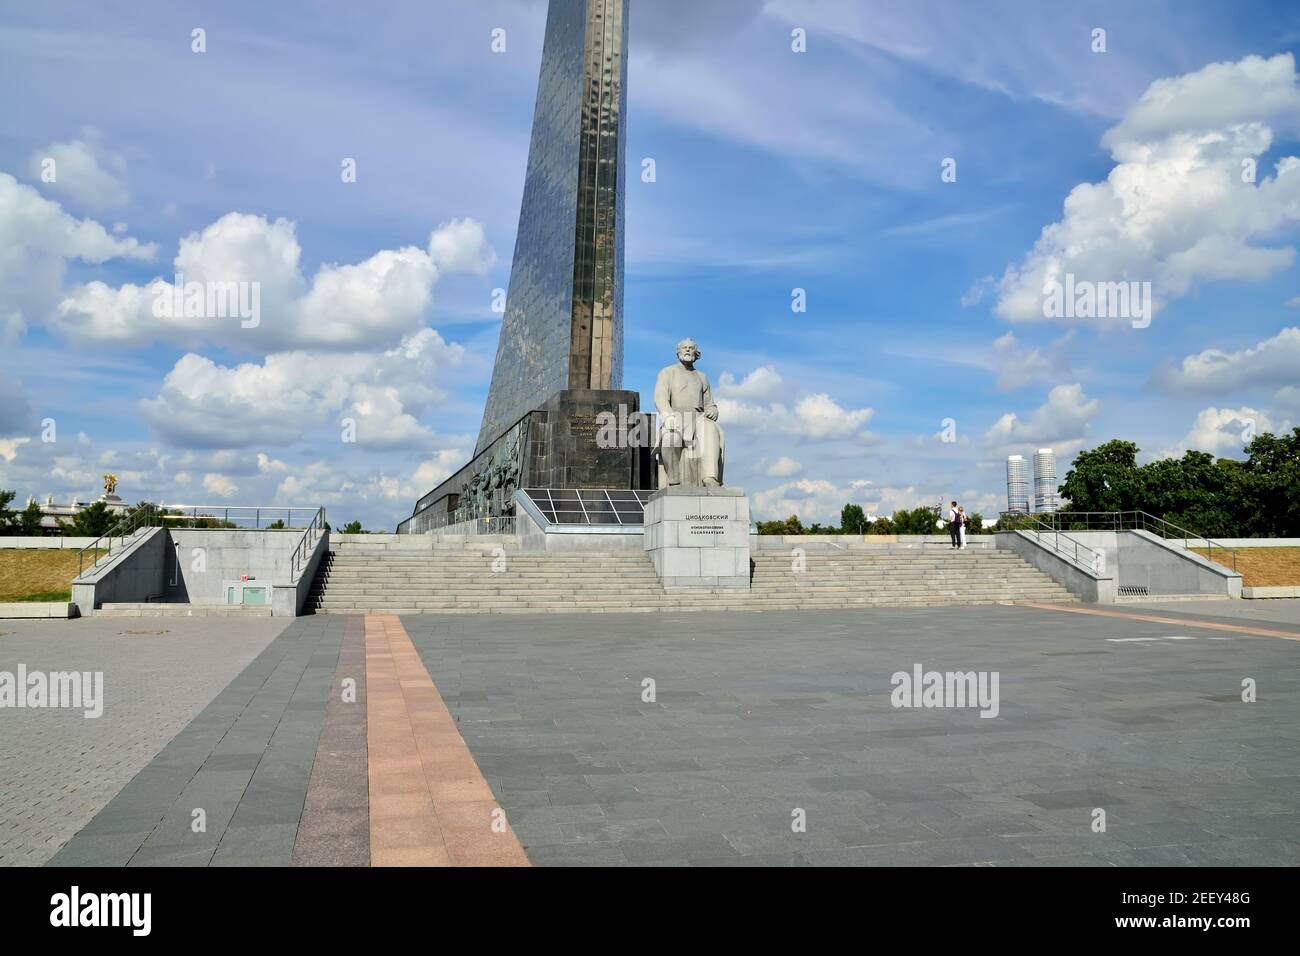 Moscow, Russia - august 25, 2020: view of the Monument to Konstantin Eduardovich Tsiolkovsky, the founder of cosmonautics, in the Cosmonautics Museum. Stock Photo